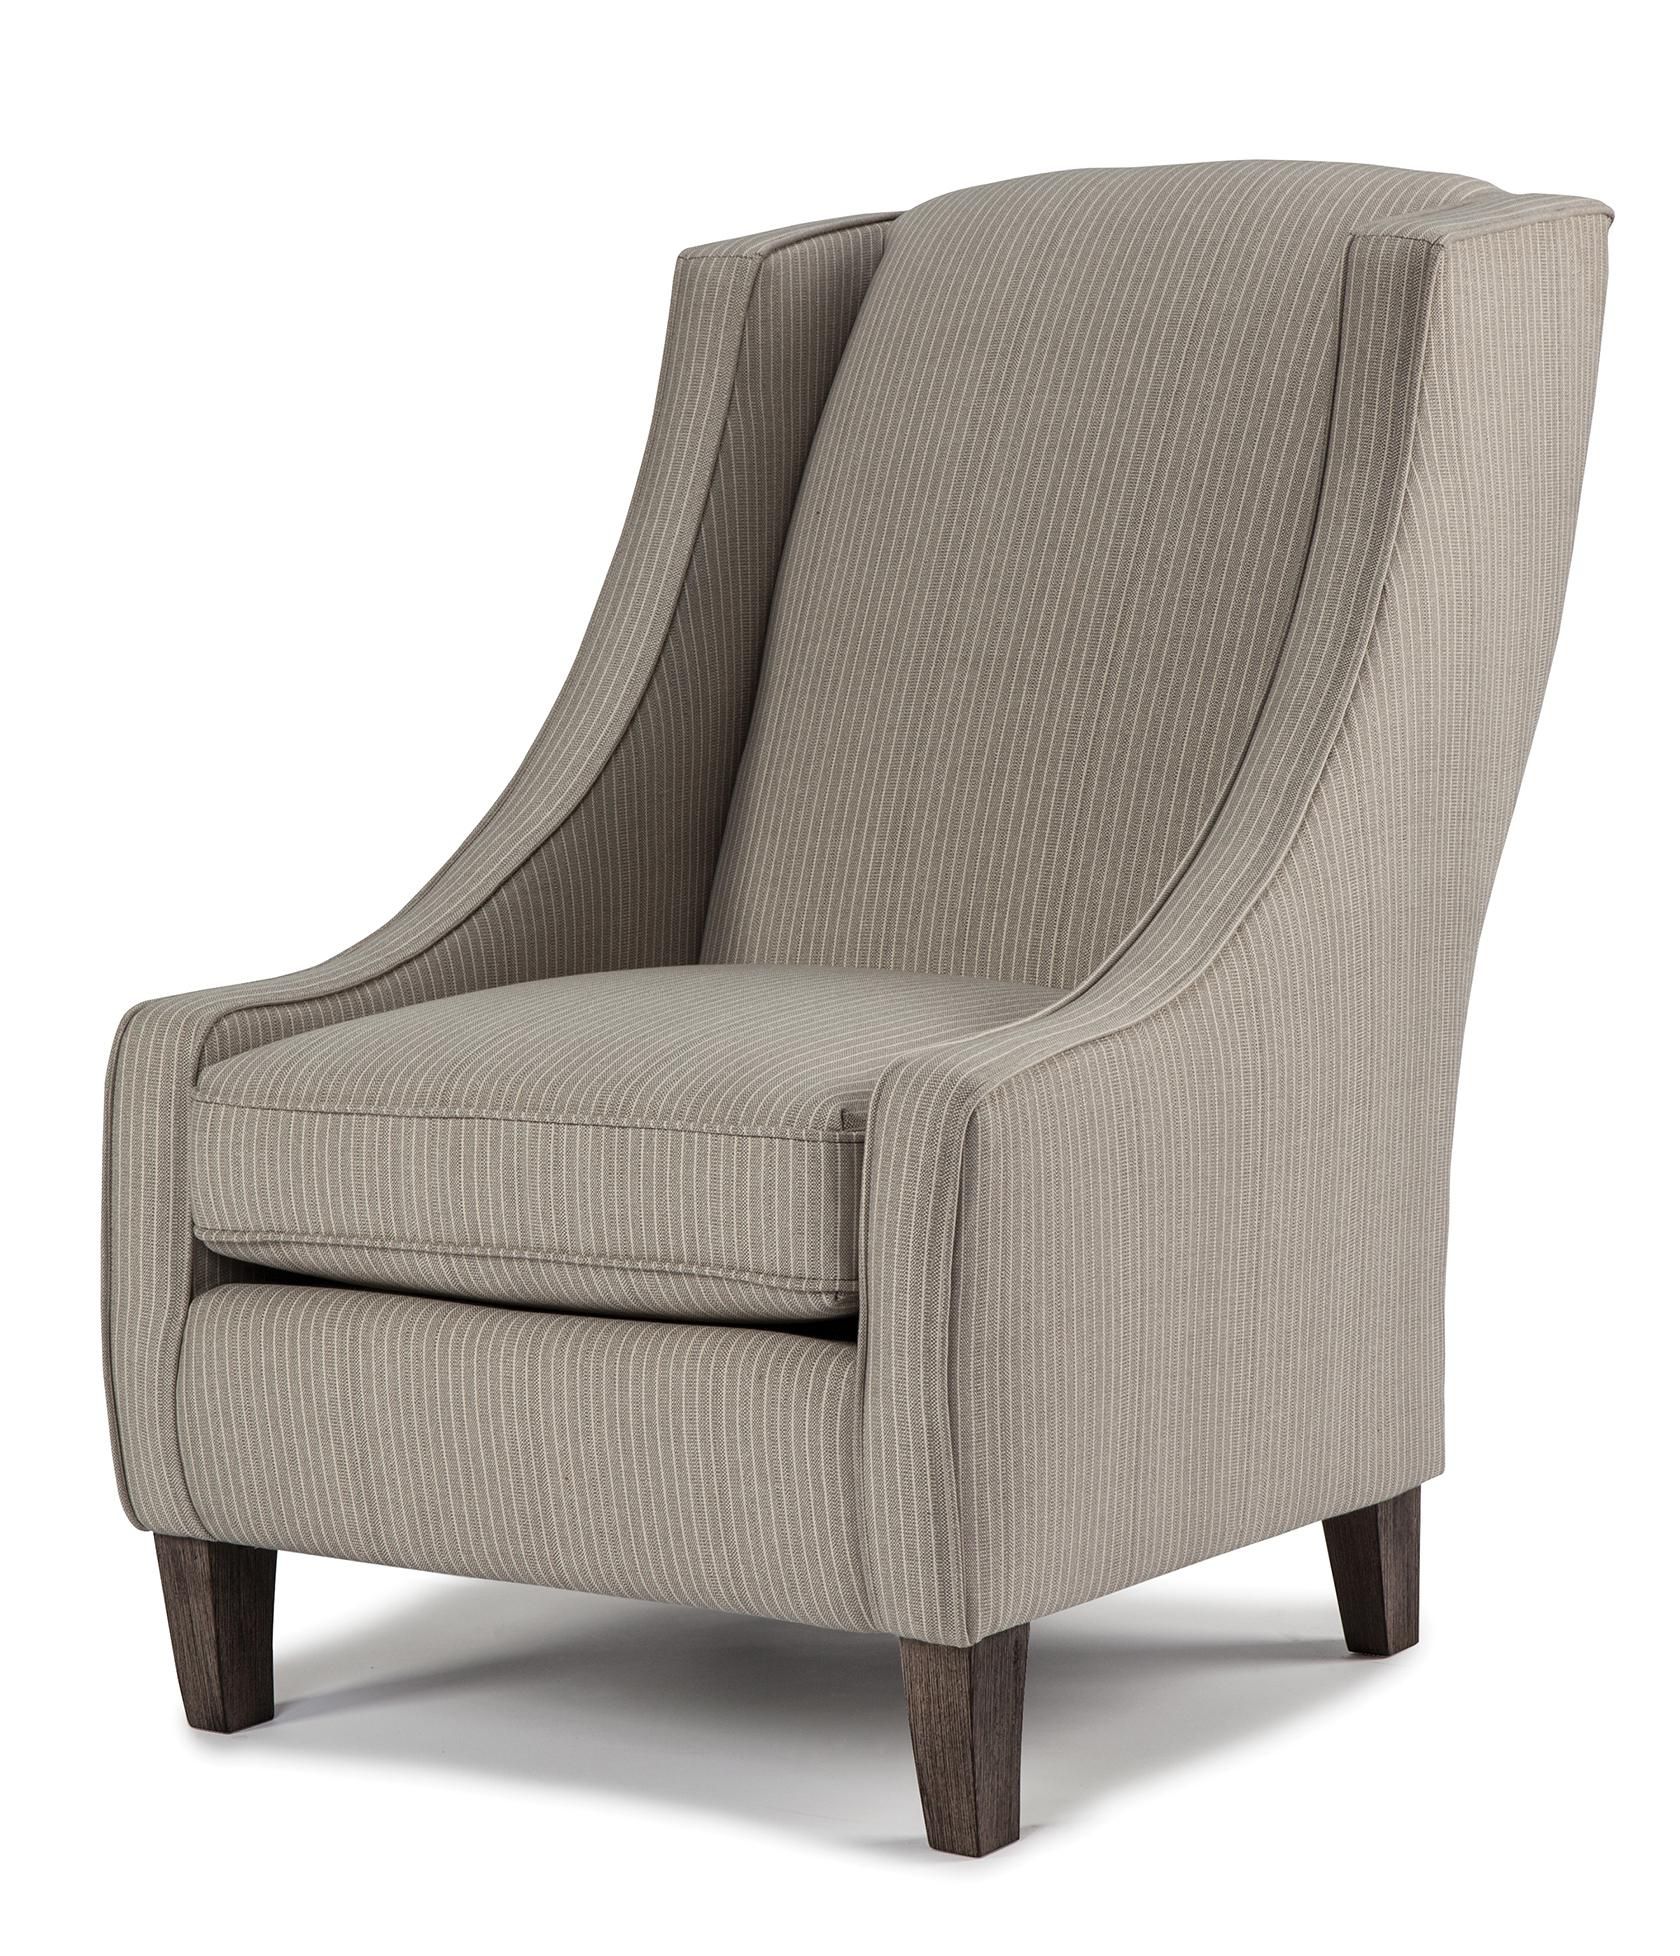 Most Popular Club Chairs Janice Club Chair Intended For Sweetwater Wingback Chairs (View 7 of 20)